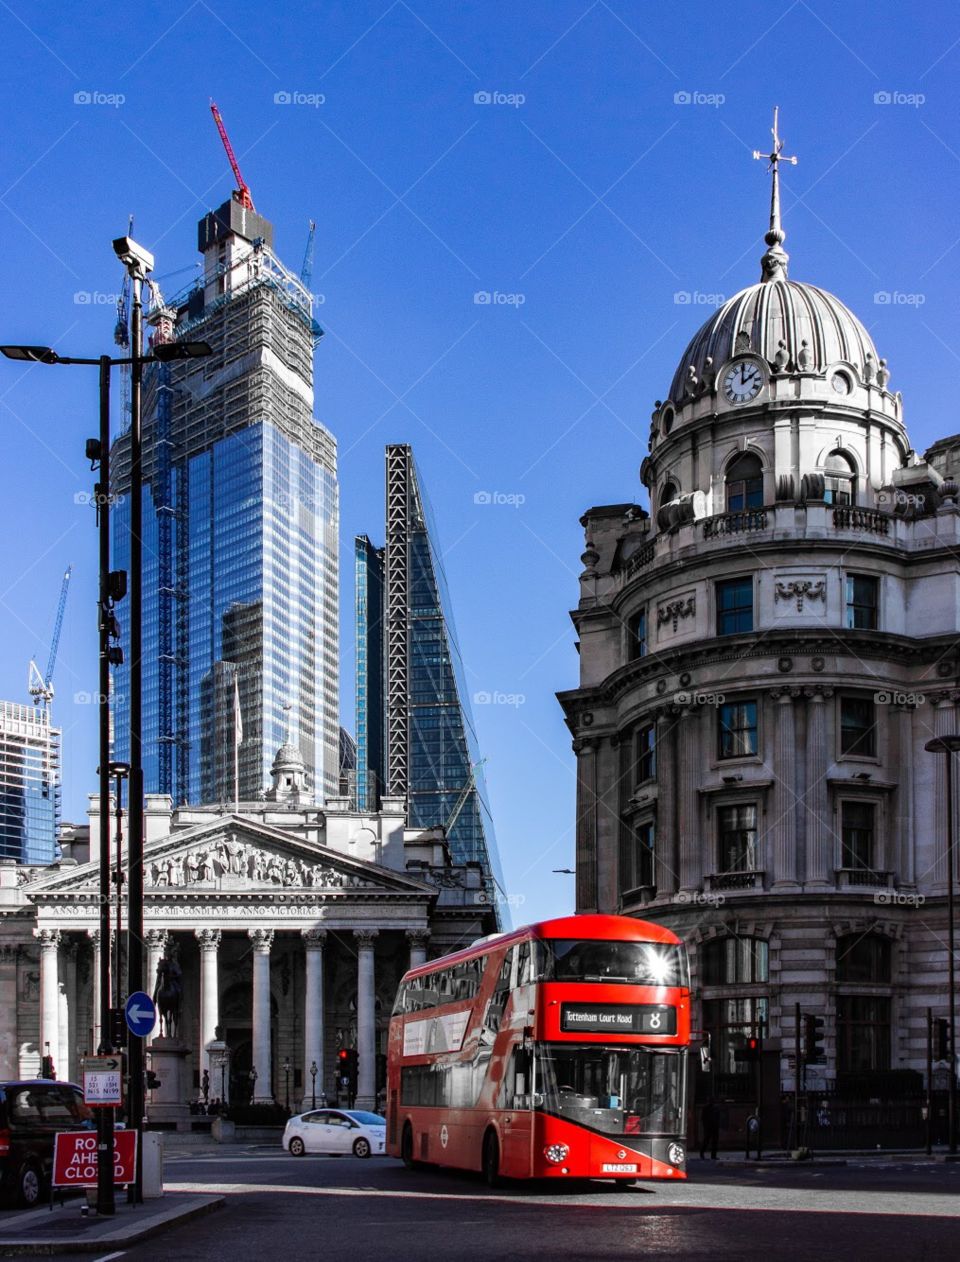 City of london. Financial district. Red bus in front of old buildings. Skyscrapers in the bakground.